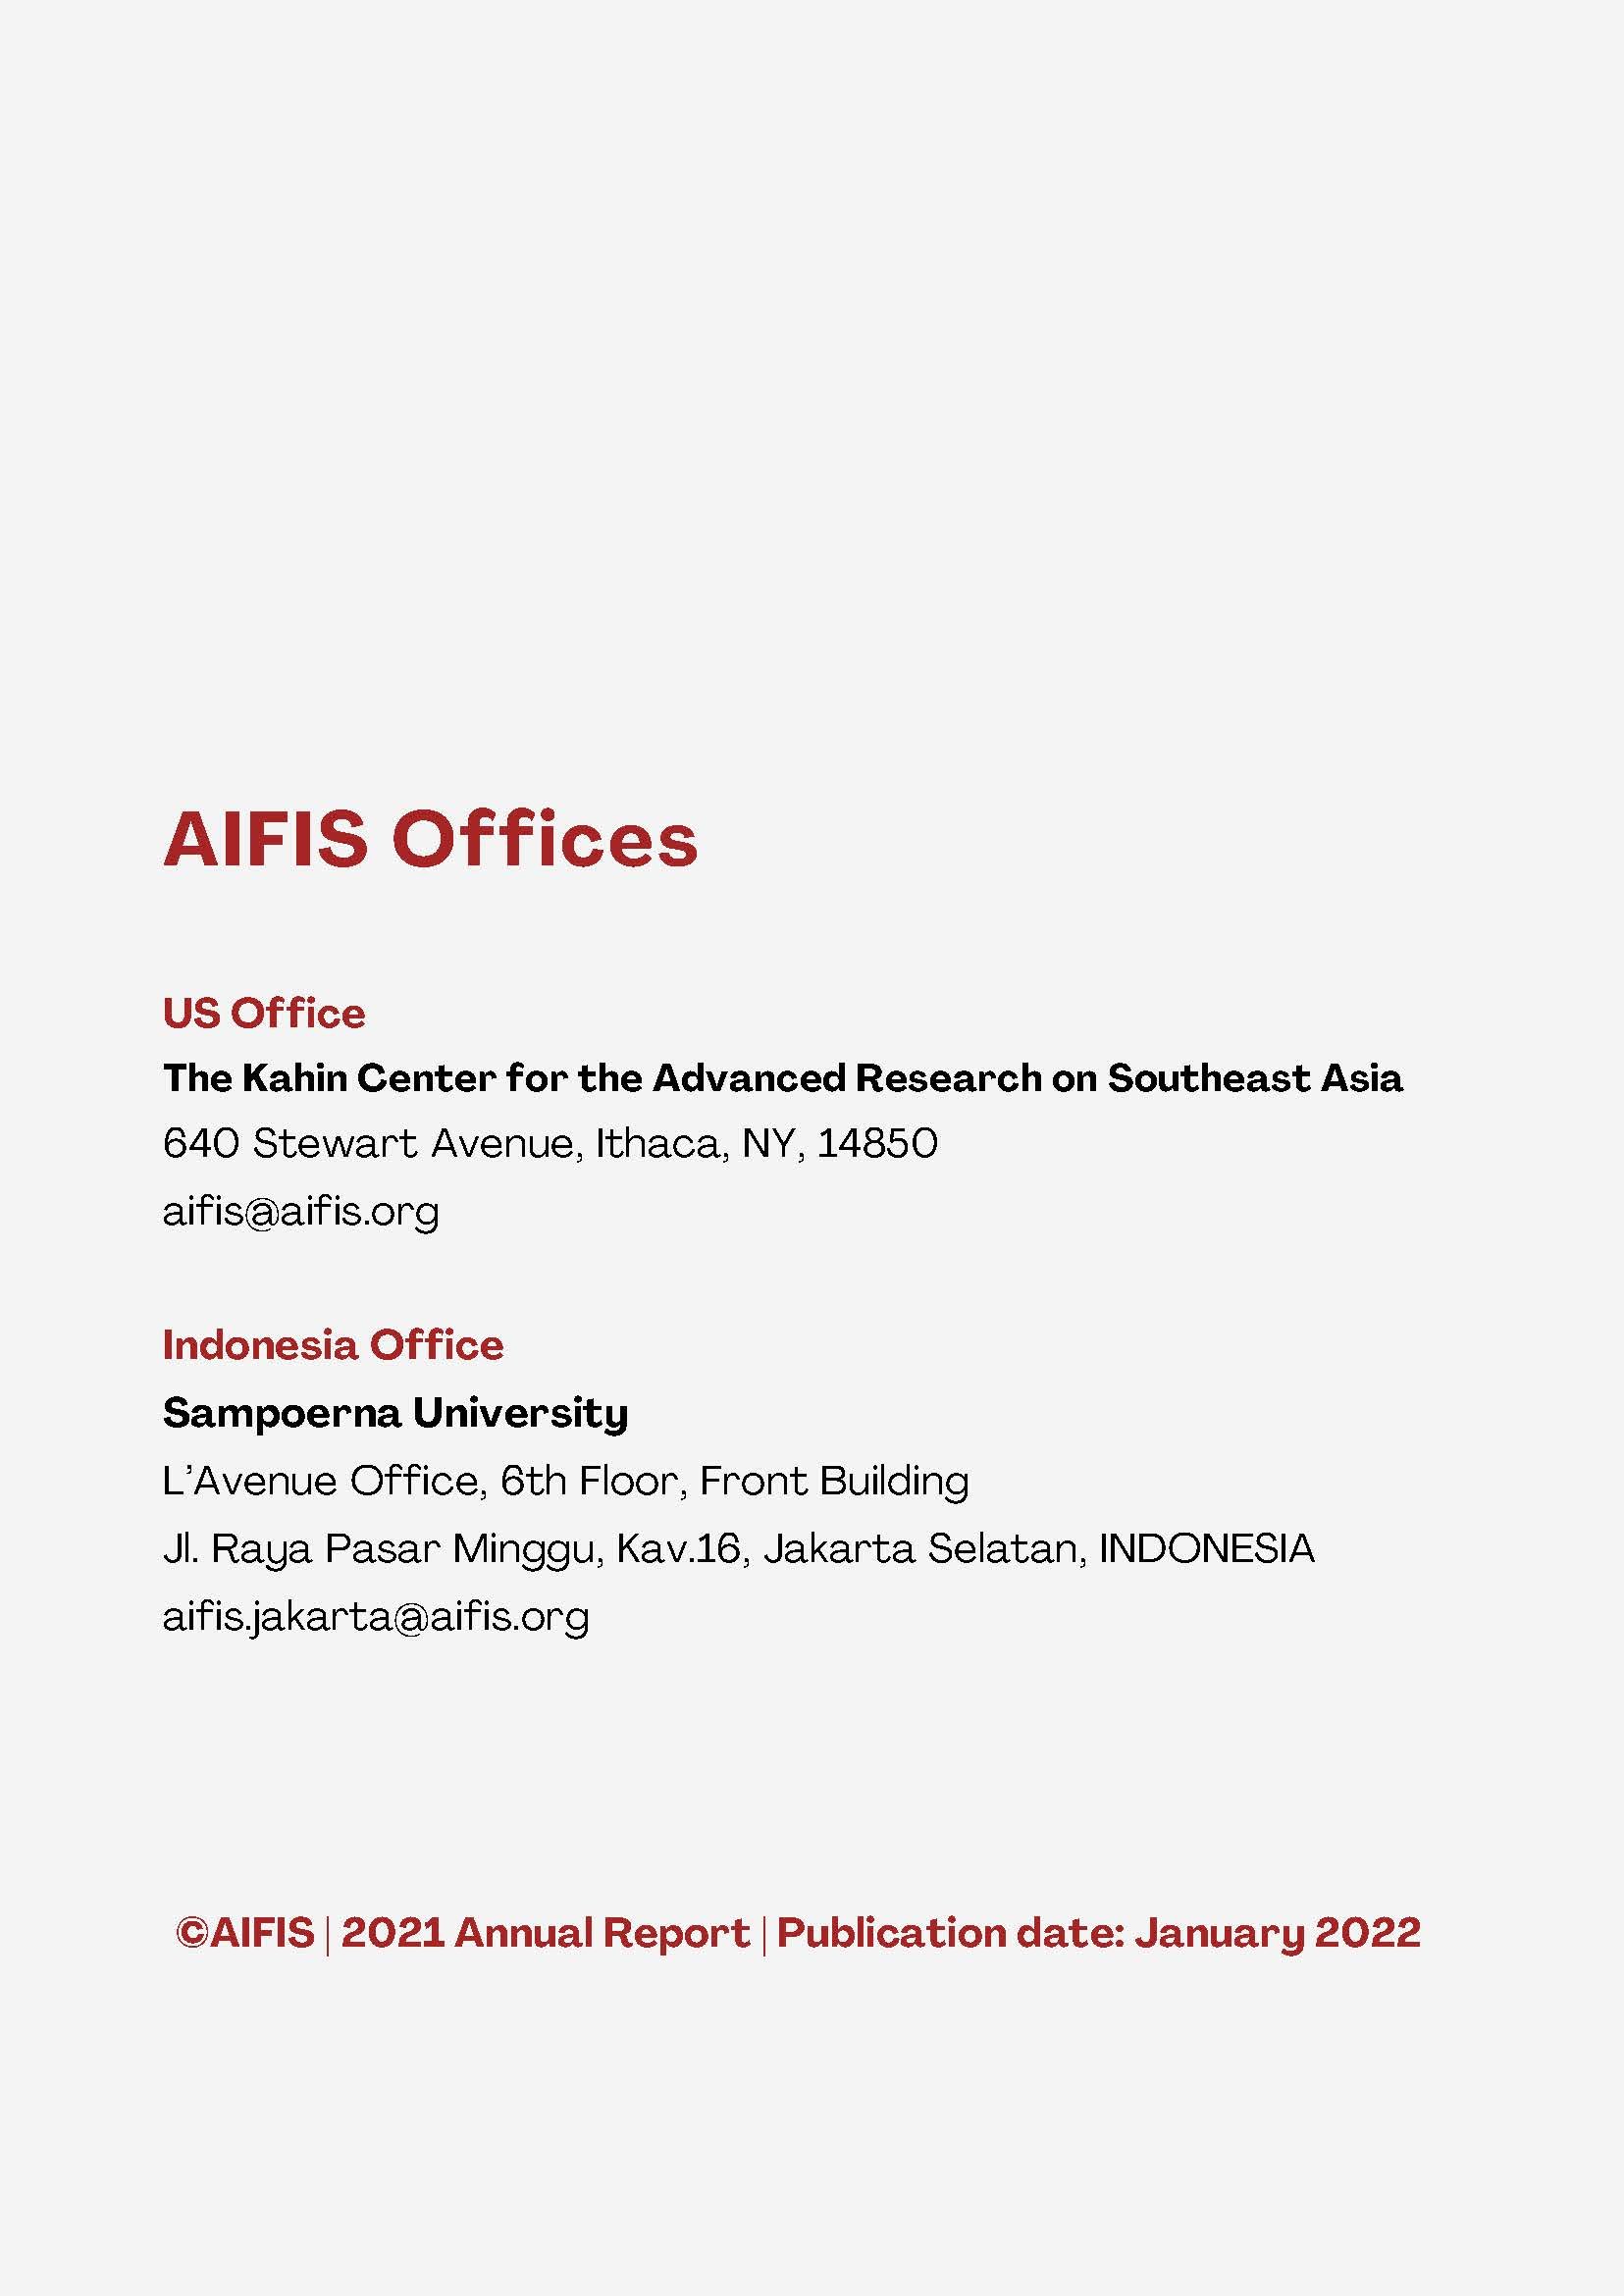 AIFIS Annual Report 2021_Corrected_Page_02.jpg